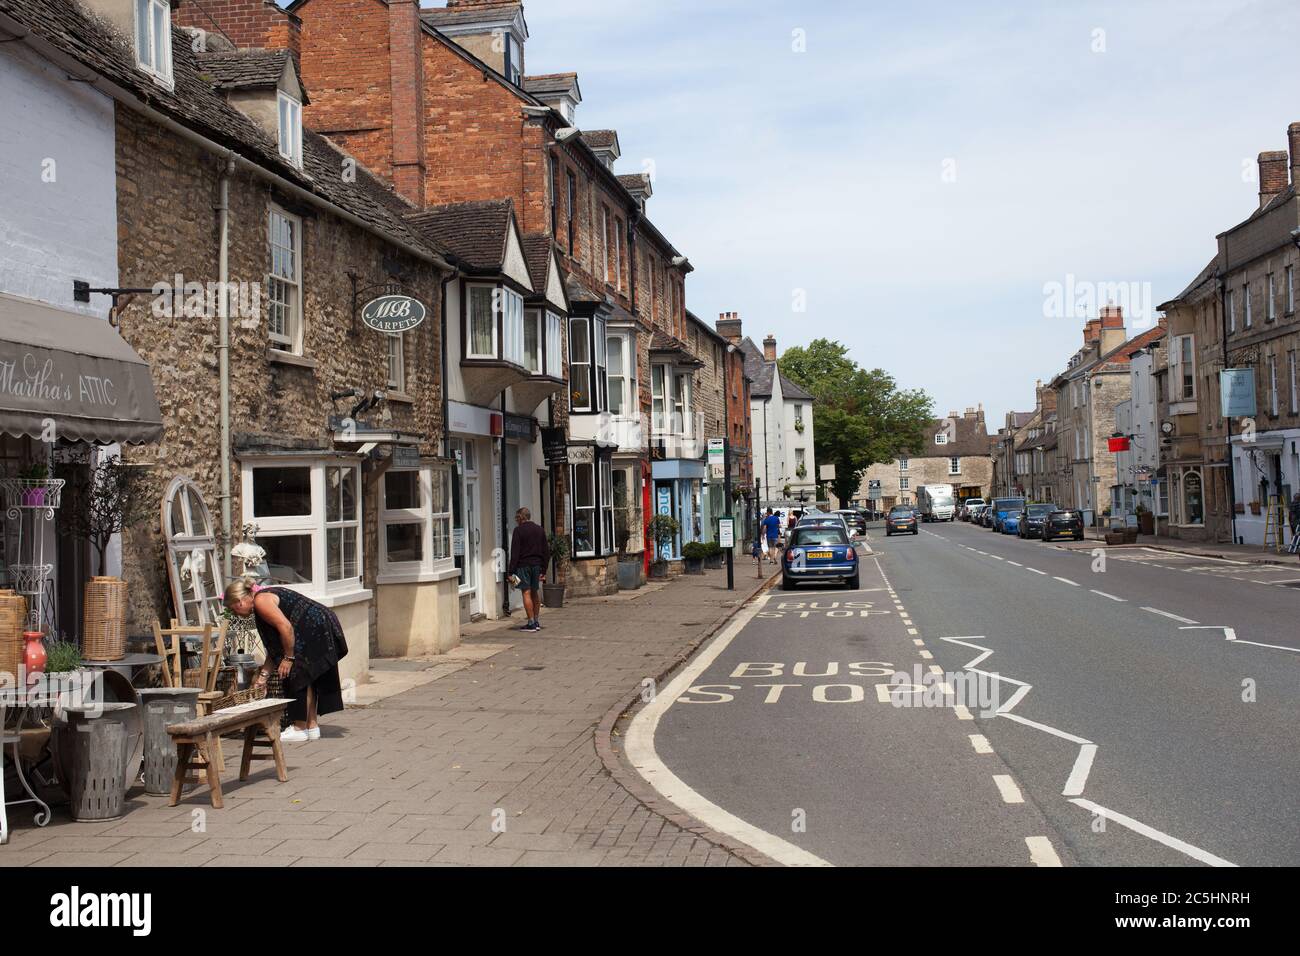 Shops and restaurants on Oxford Street in Woodstock in the UK Stock Photo